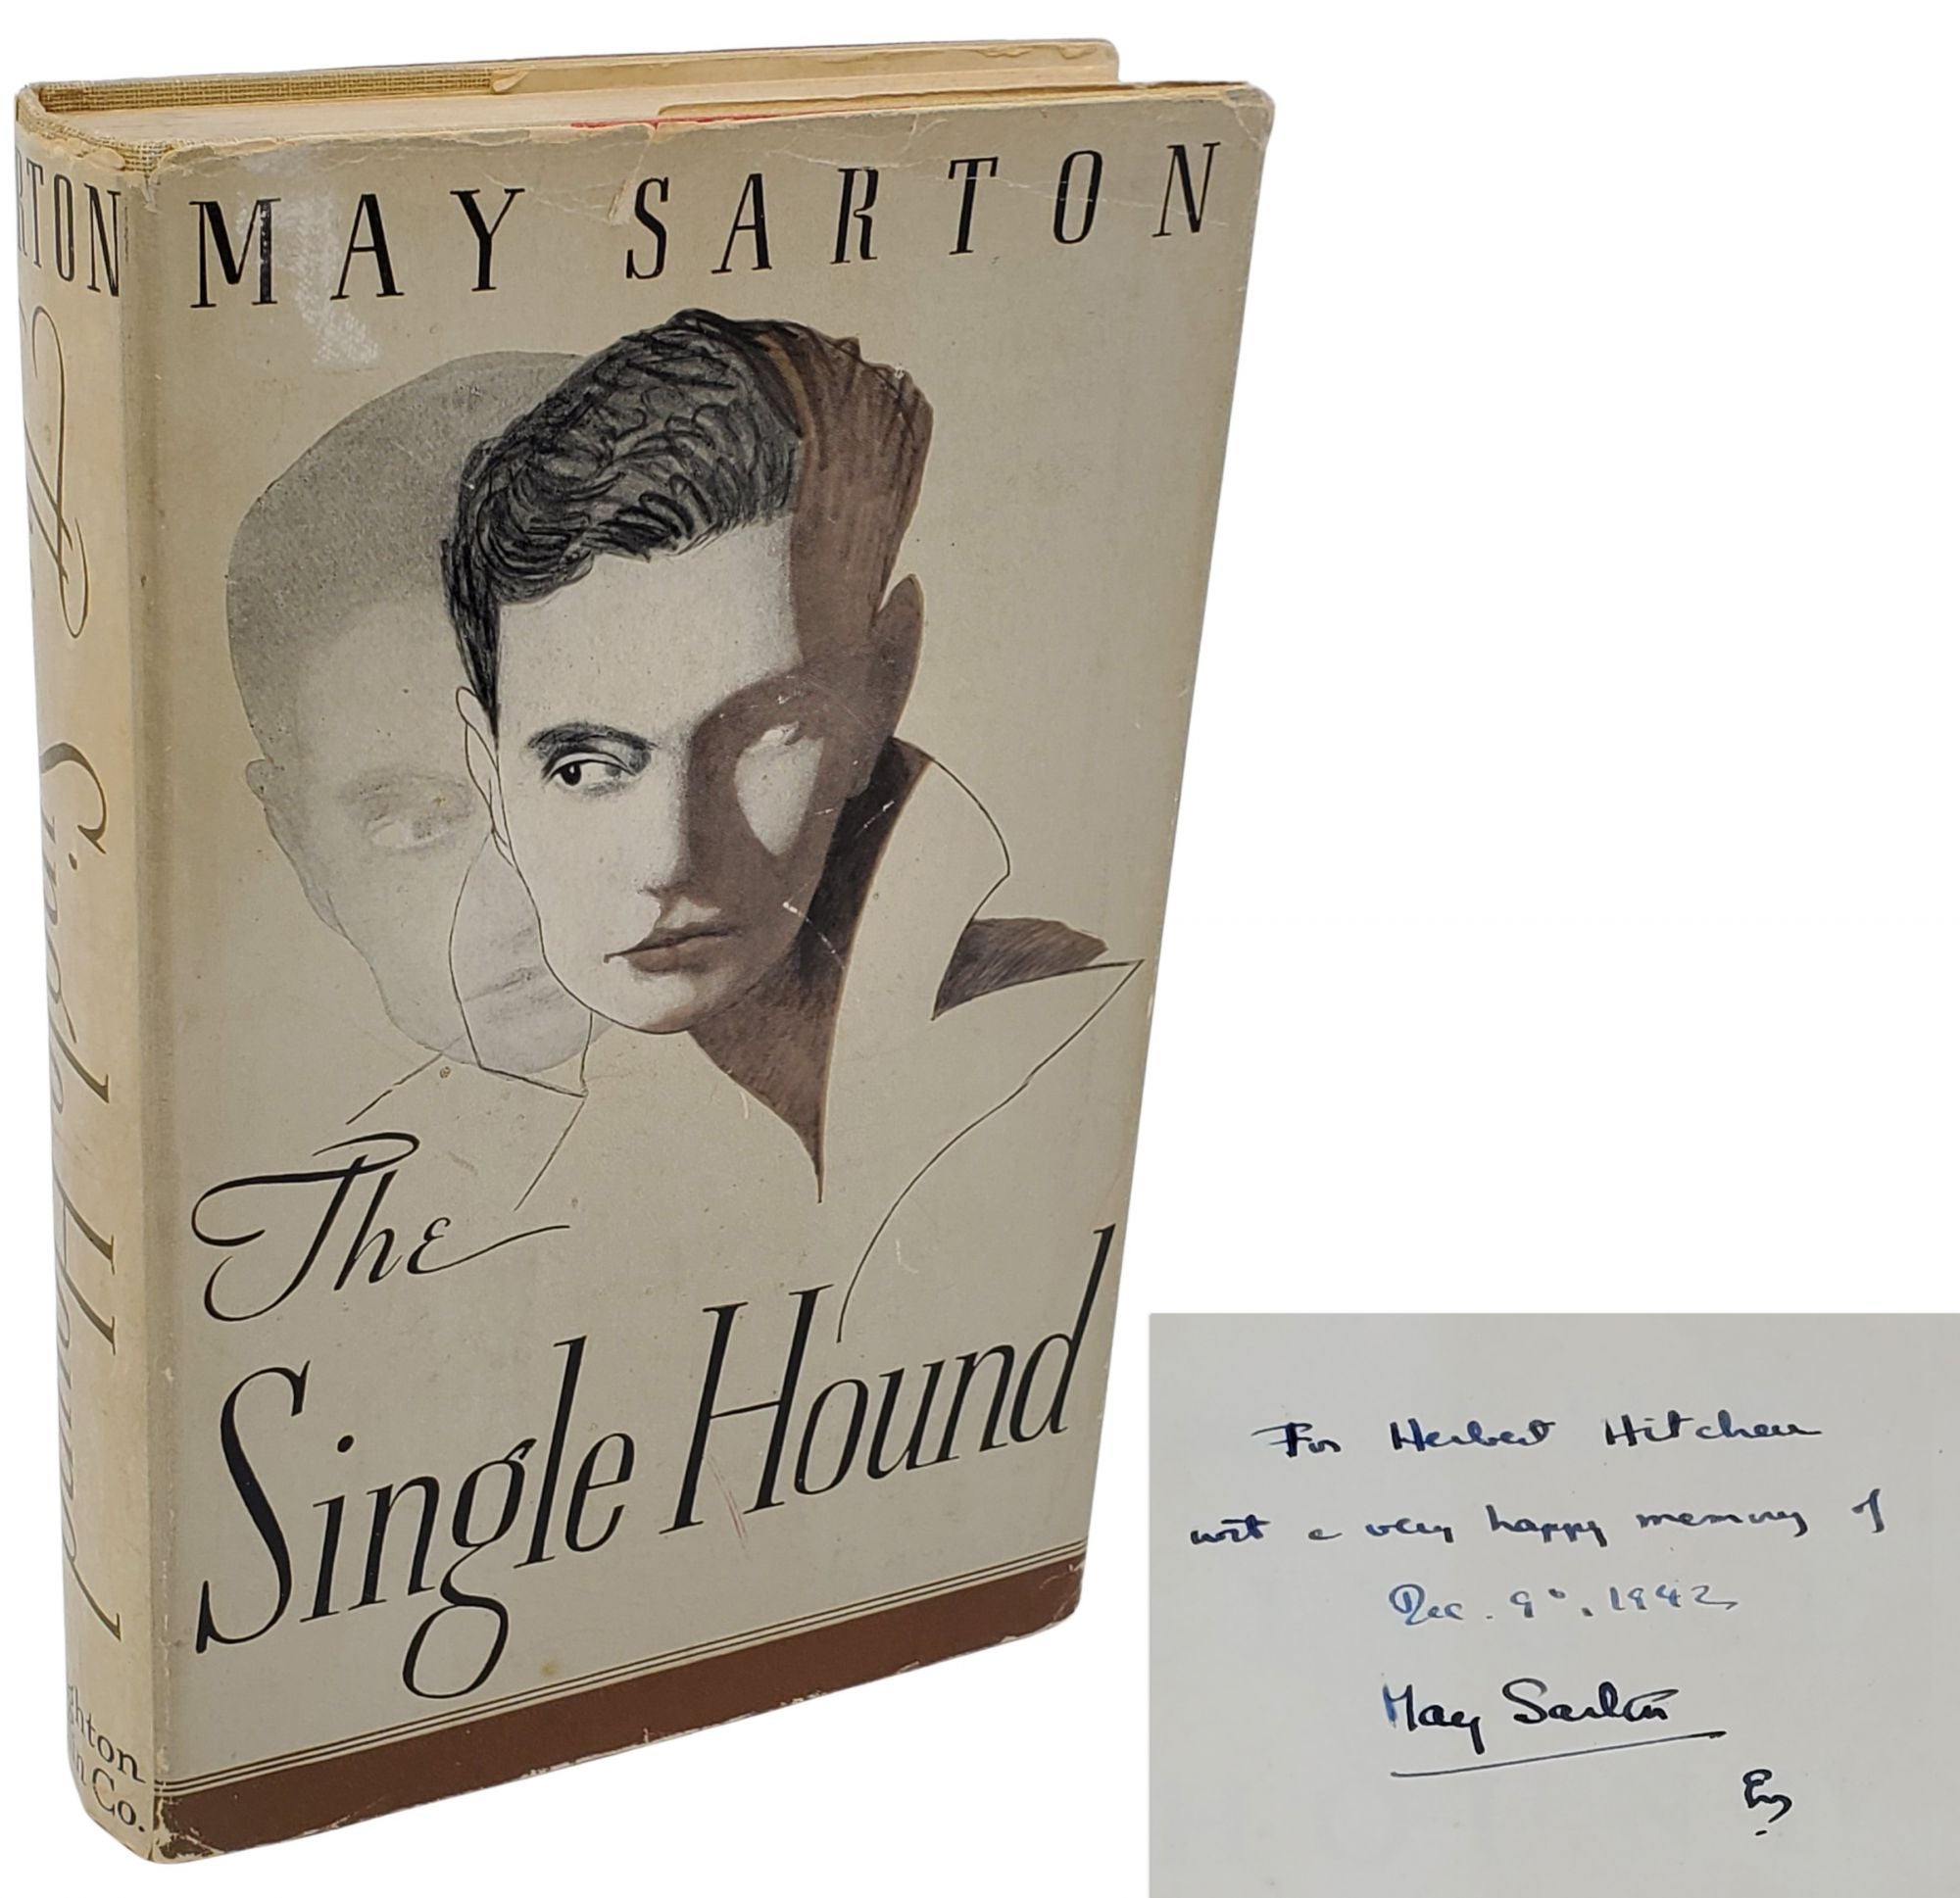 [Book #28817] THE SINGLE HOUND [SIGNED & INSCRIBED]. May Sarton.